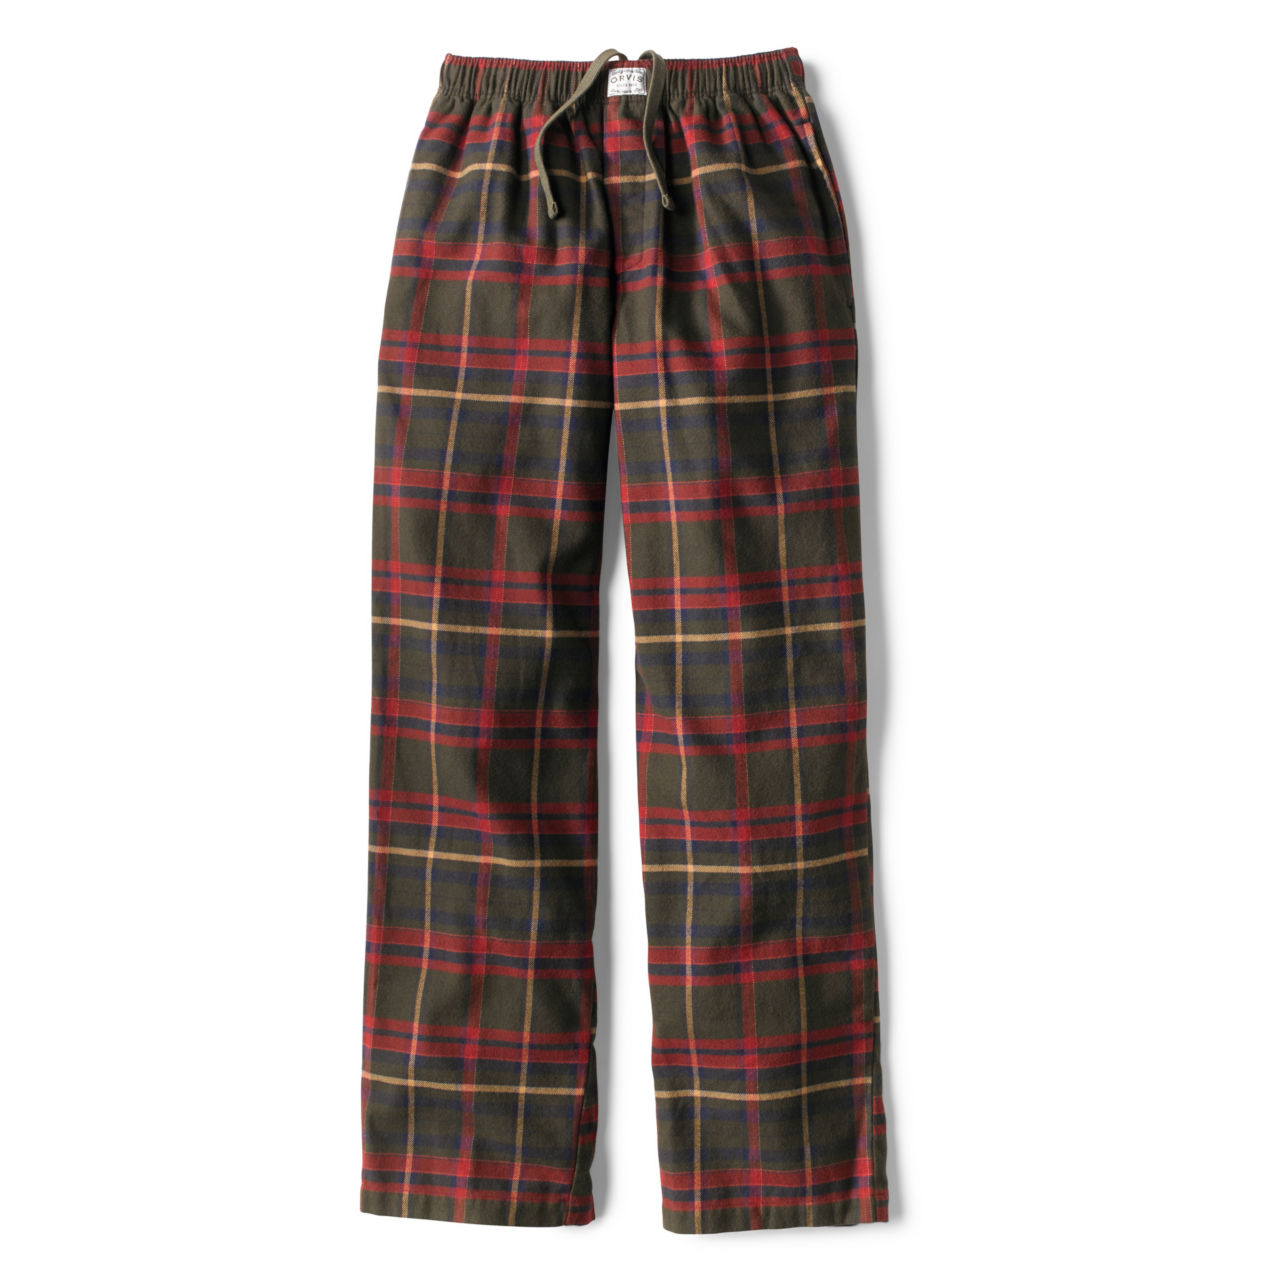 Perfect Flannel Pajama Bottoms - HUNTER/NAVY image number 0